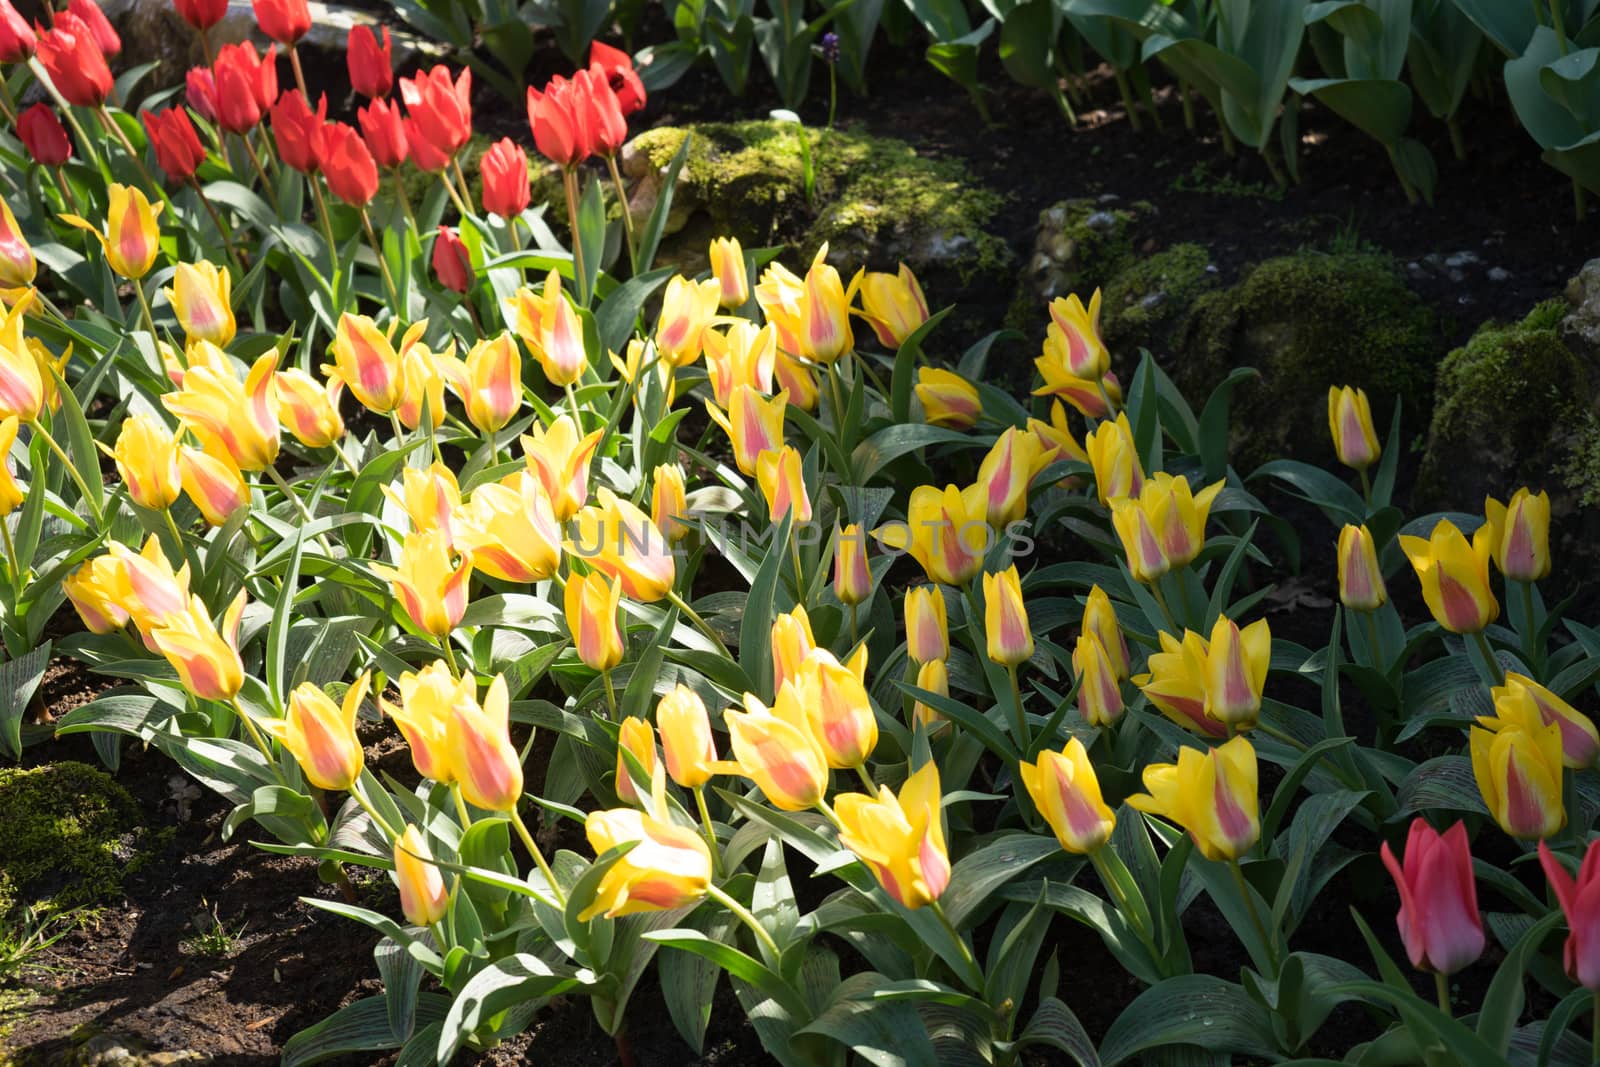 Yellow tulips in a garden in Lisse, Netherlands, Europe on a bright summer day